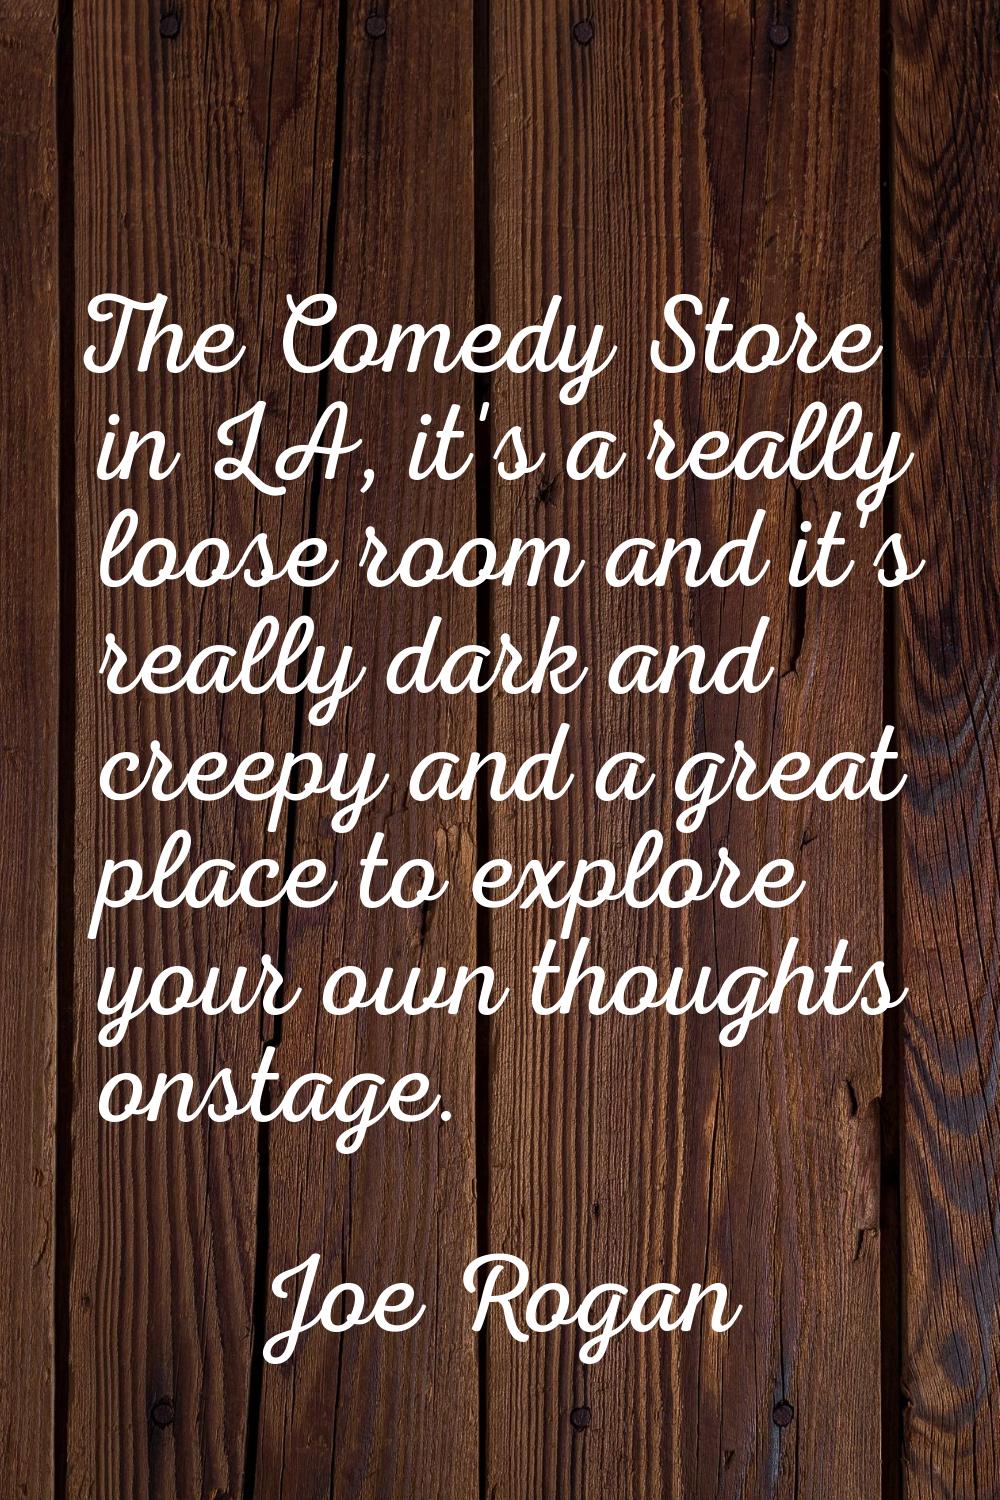 The Comedy Store in LA, it's a really loose room and it's really dark and creepy and a great place 